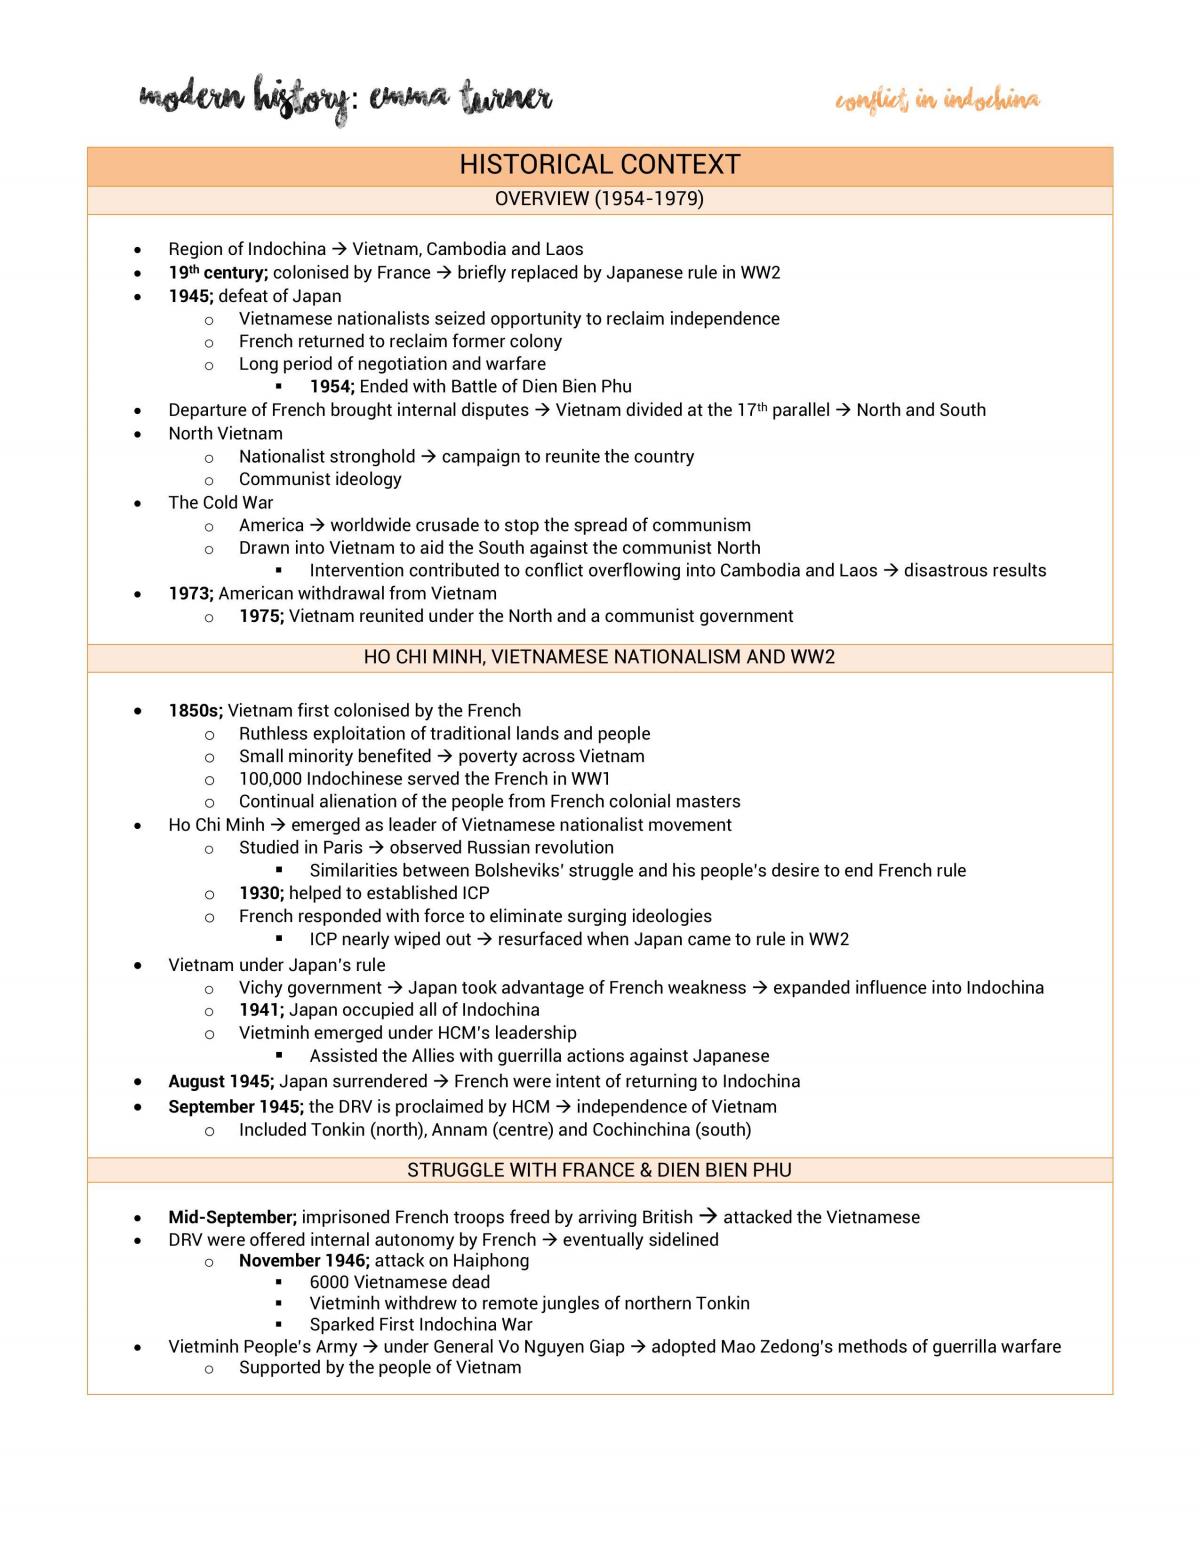 Conflict in Indochina - HSC Study Notes - Page 1